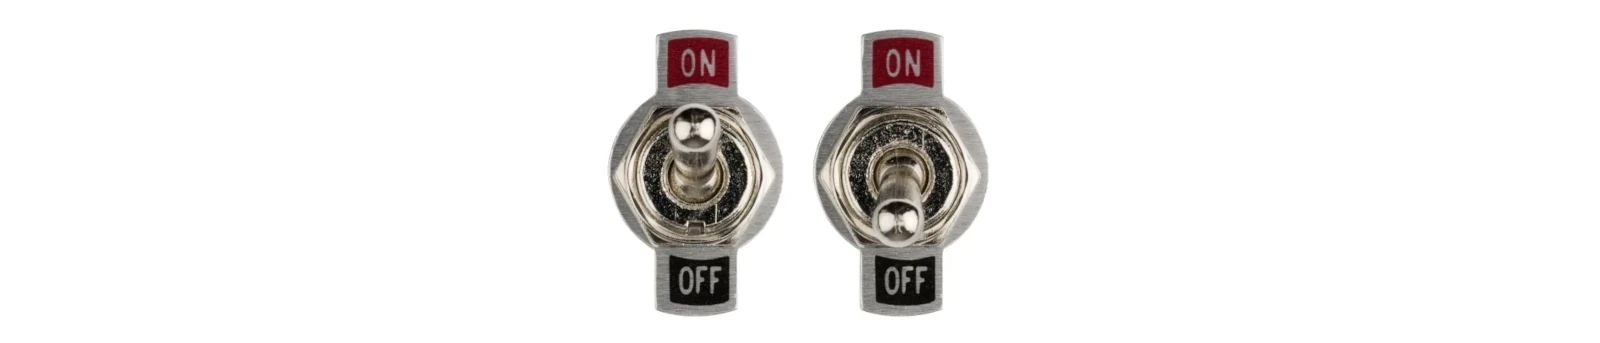 Two toggle switches, one set to the on position and the other set to the off position